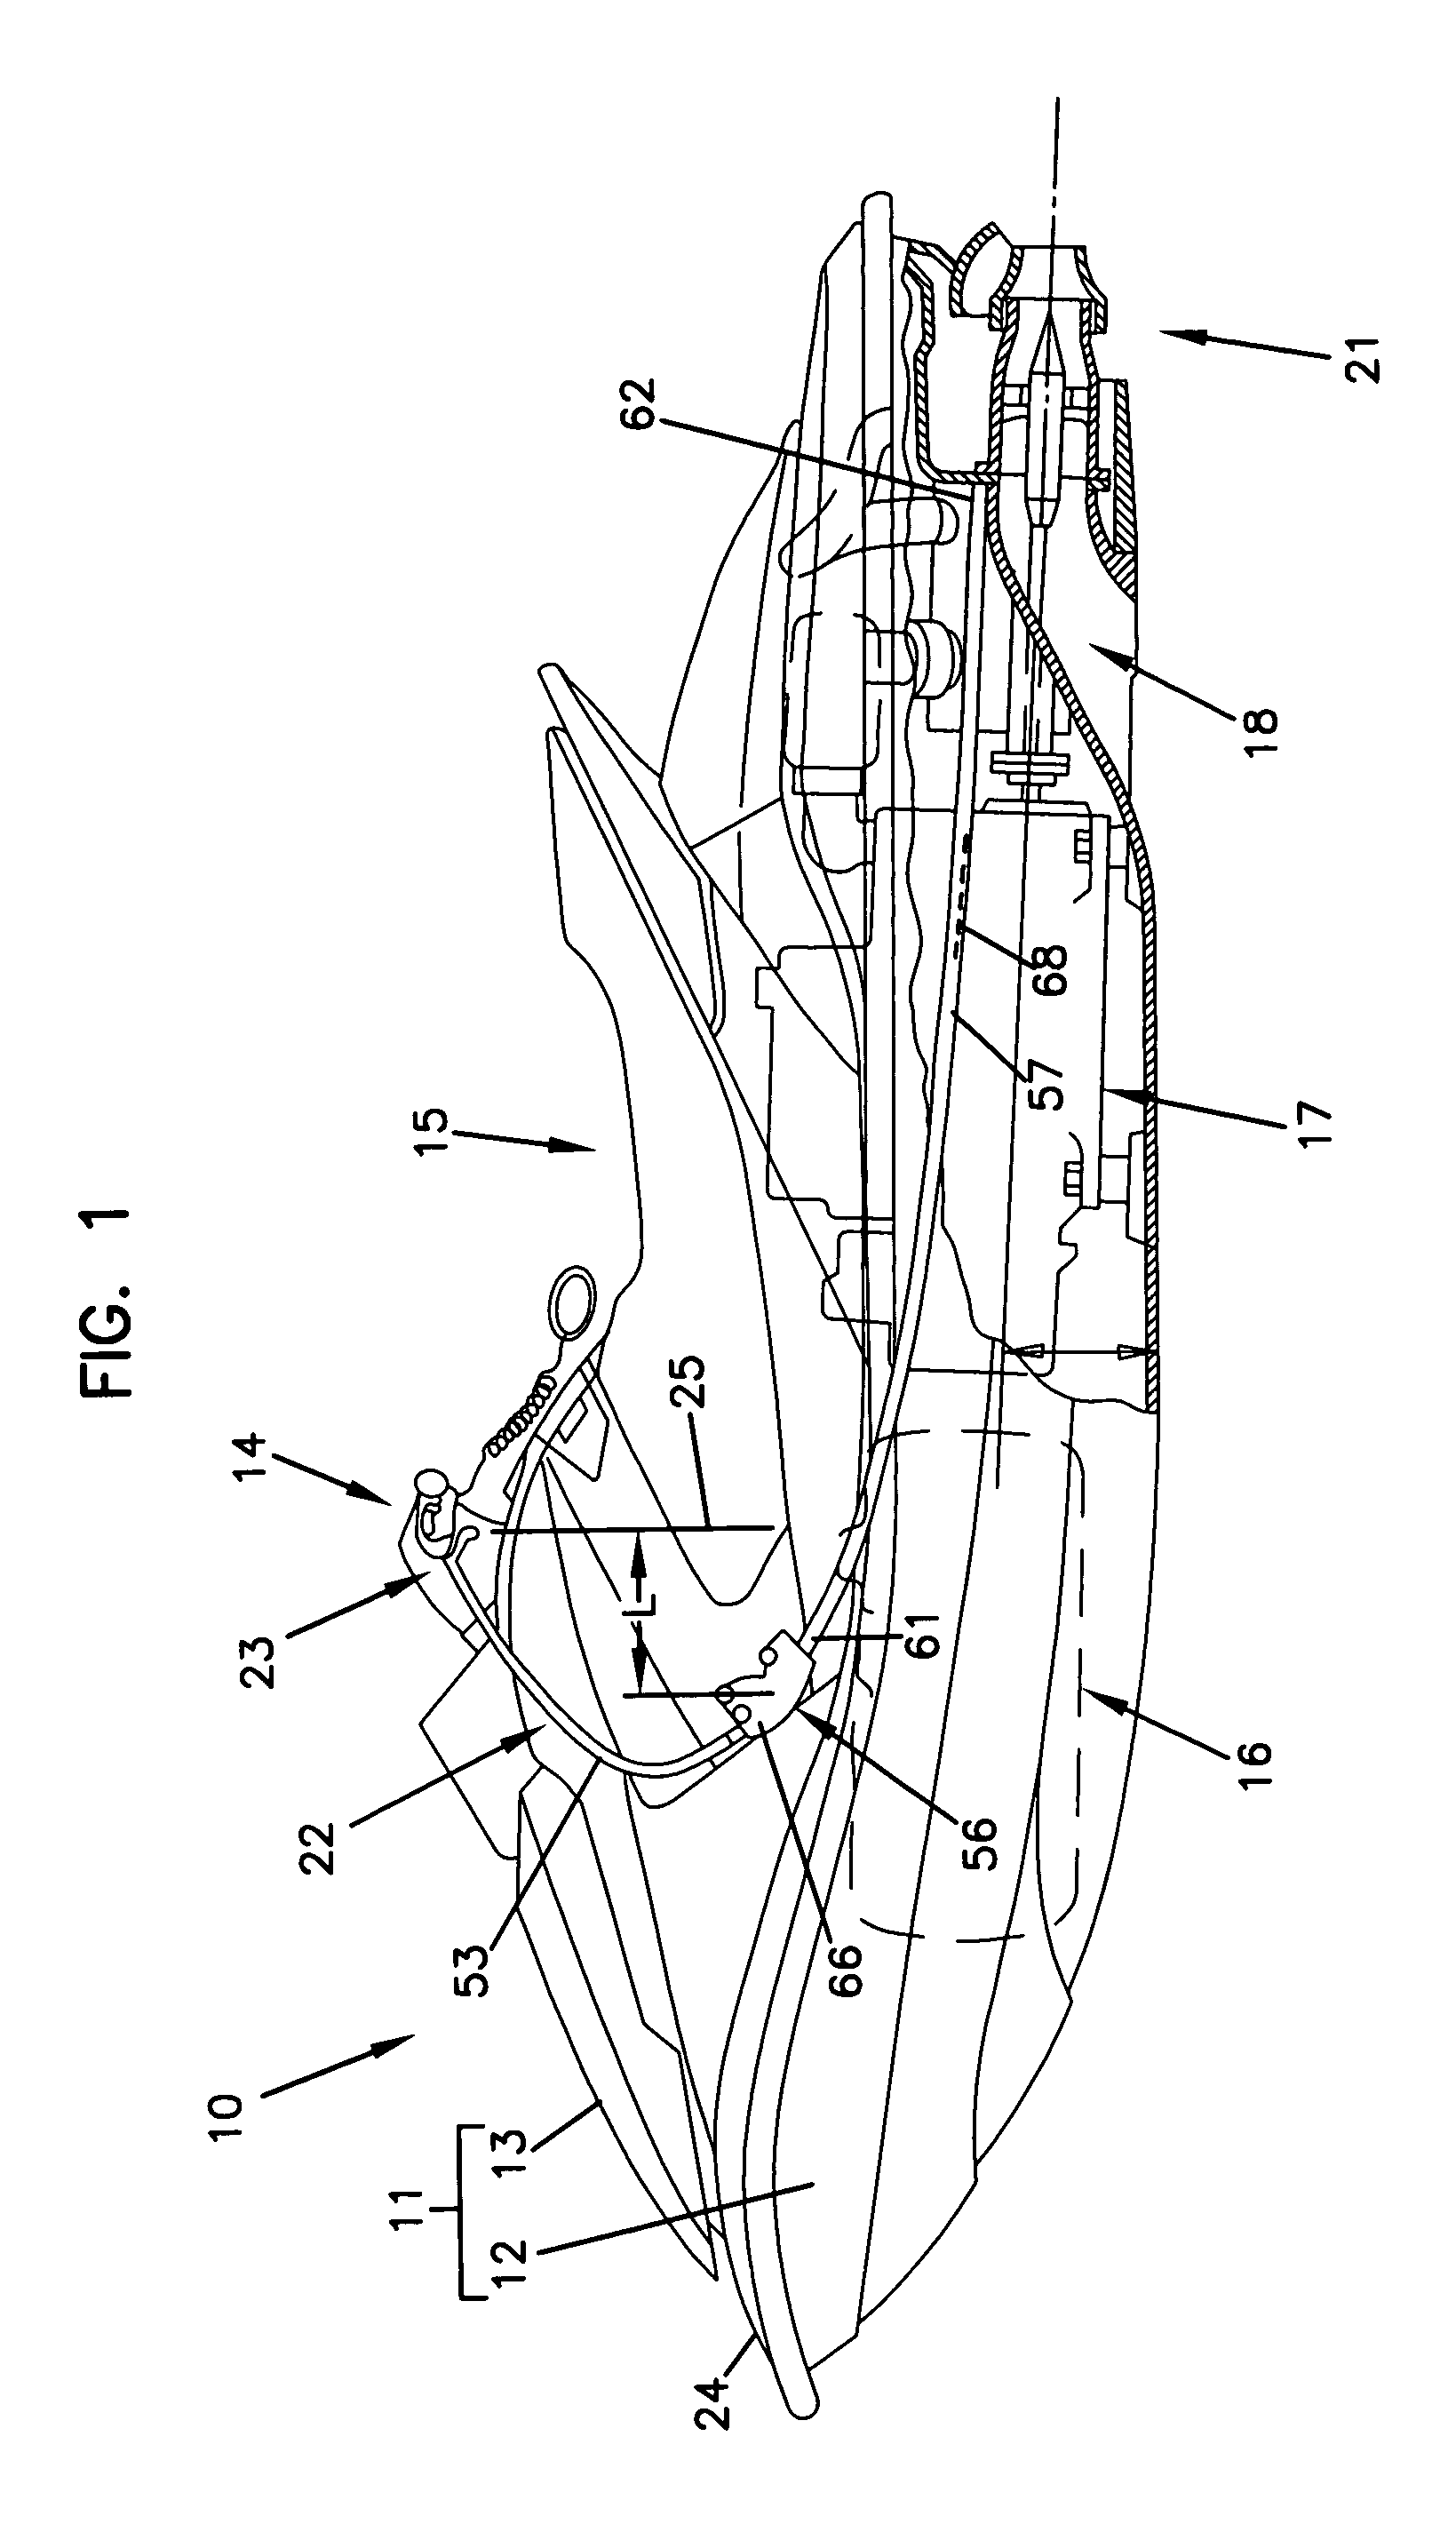 Trim operating wire structure for personal watercraft